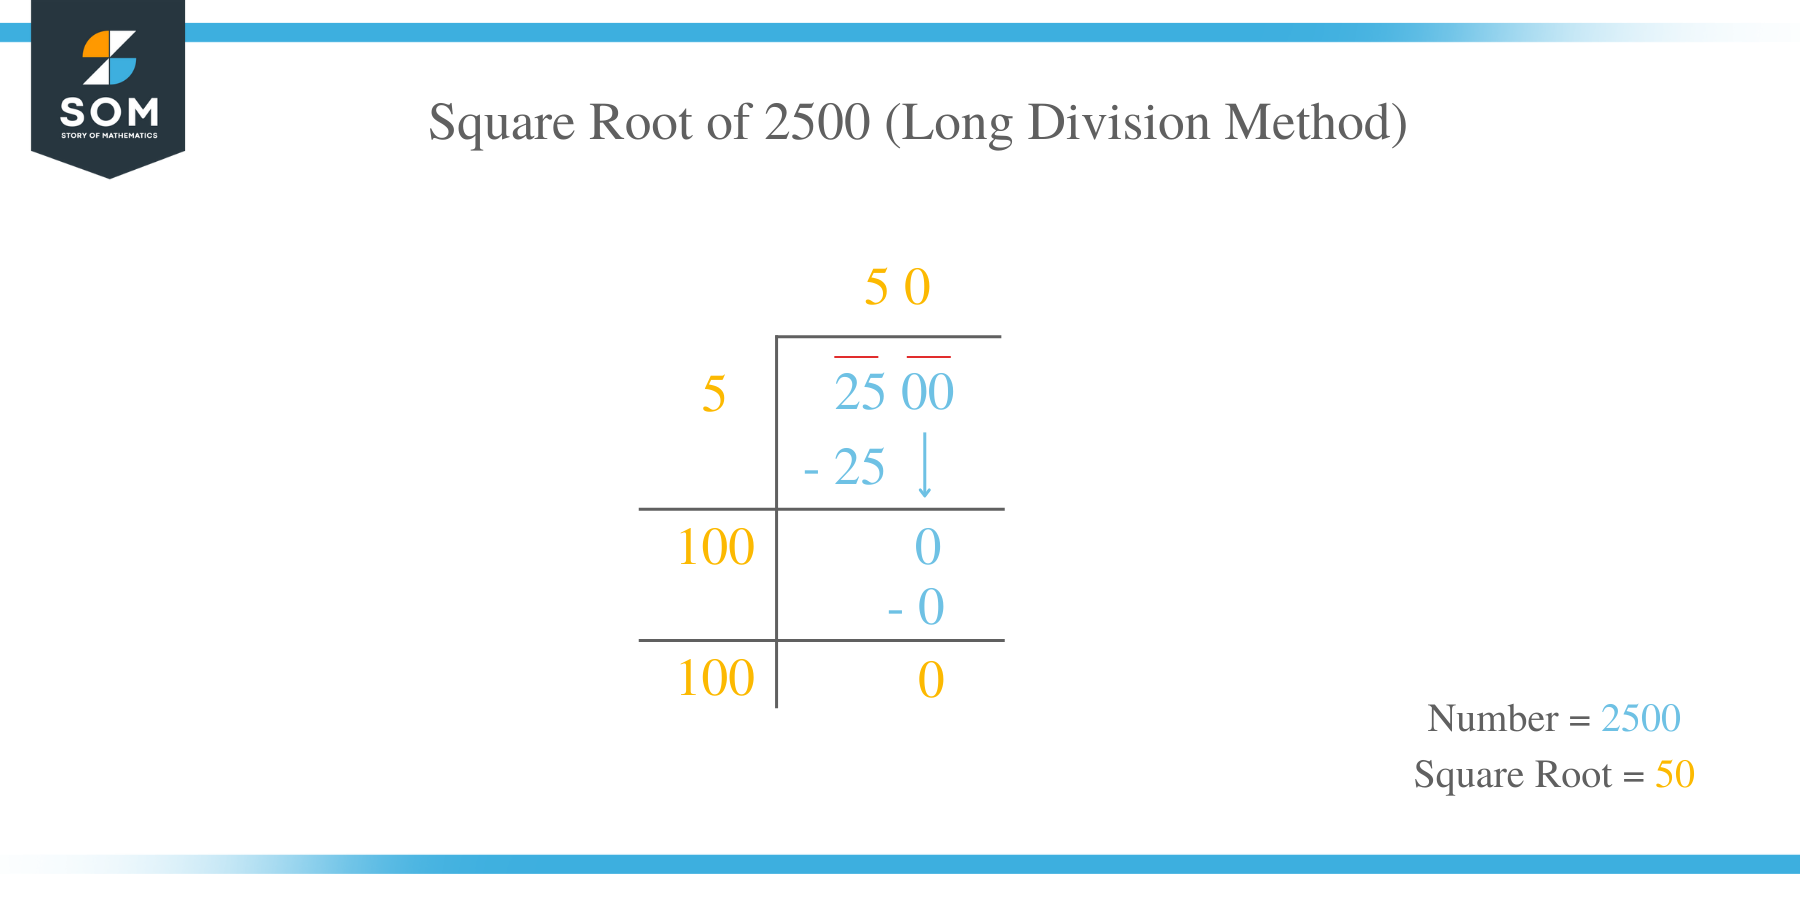 Square Root of 2500 by Long Division Method